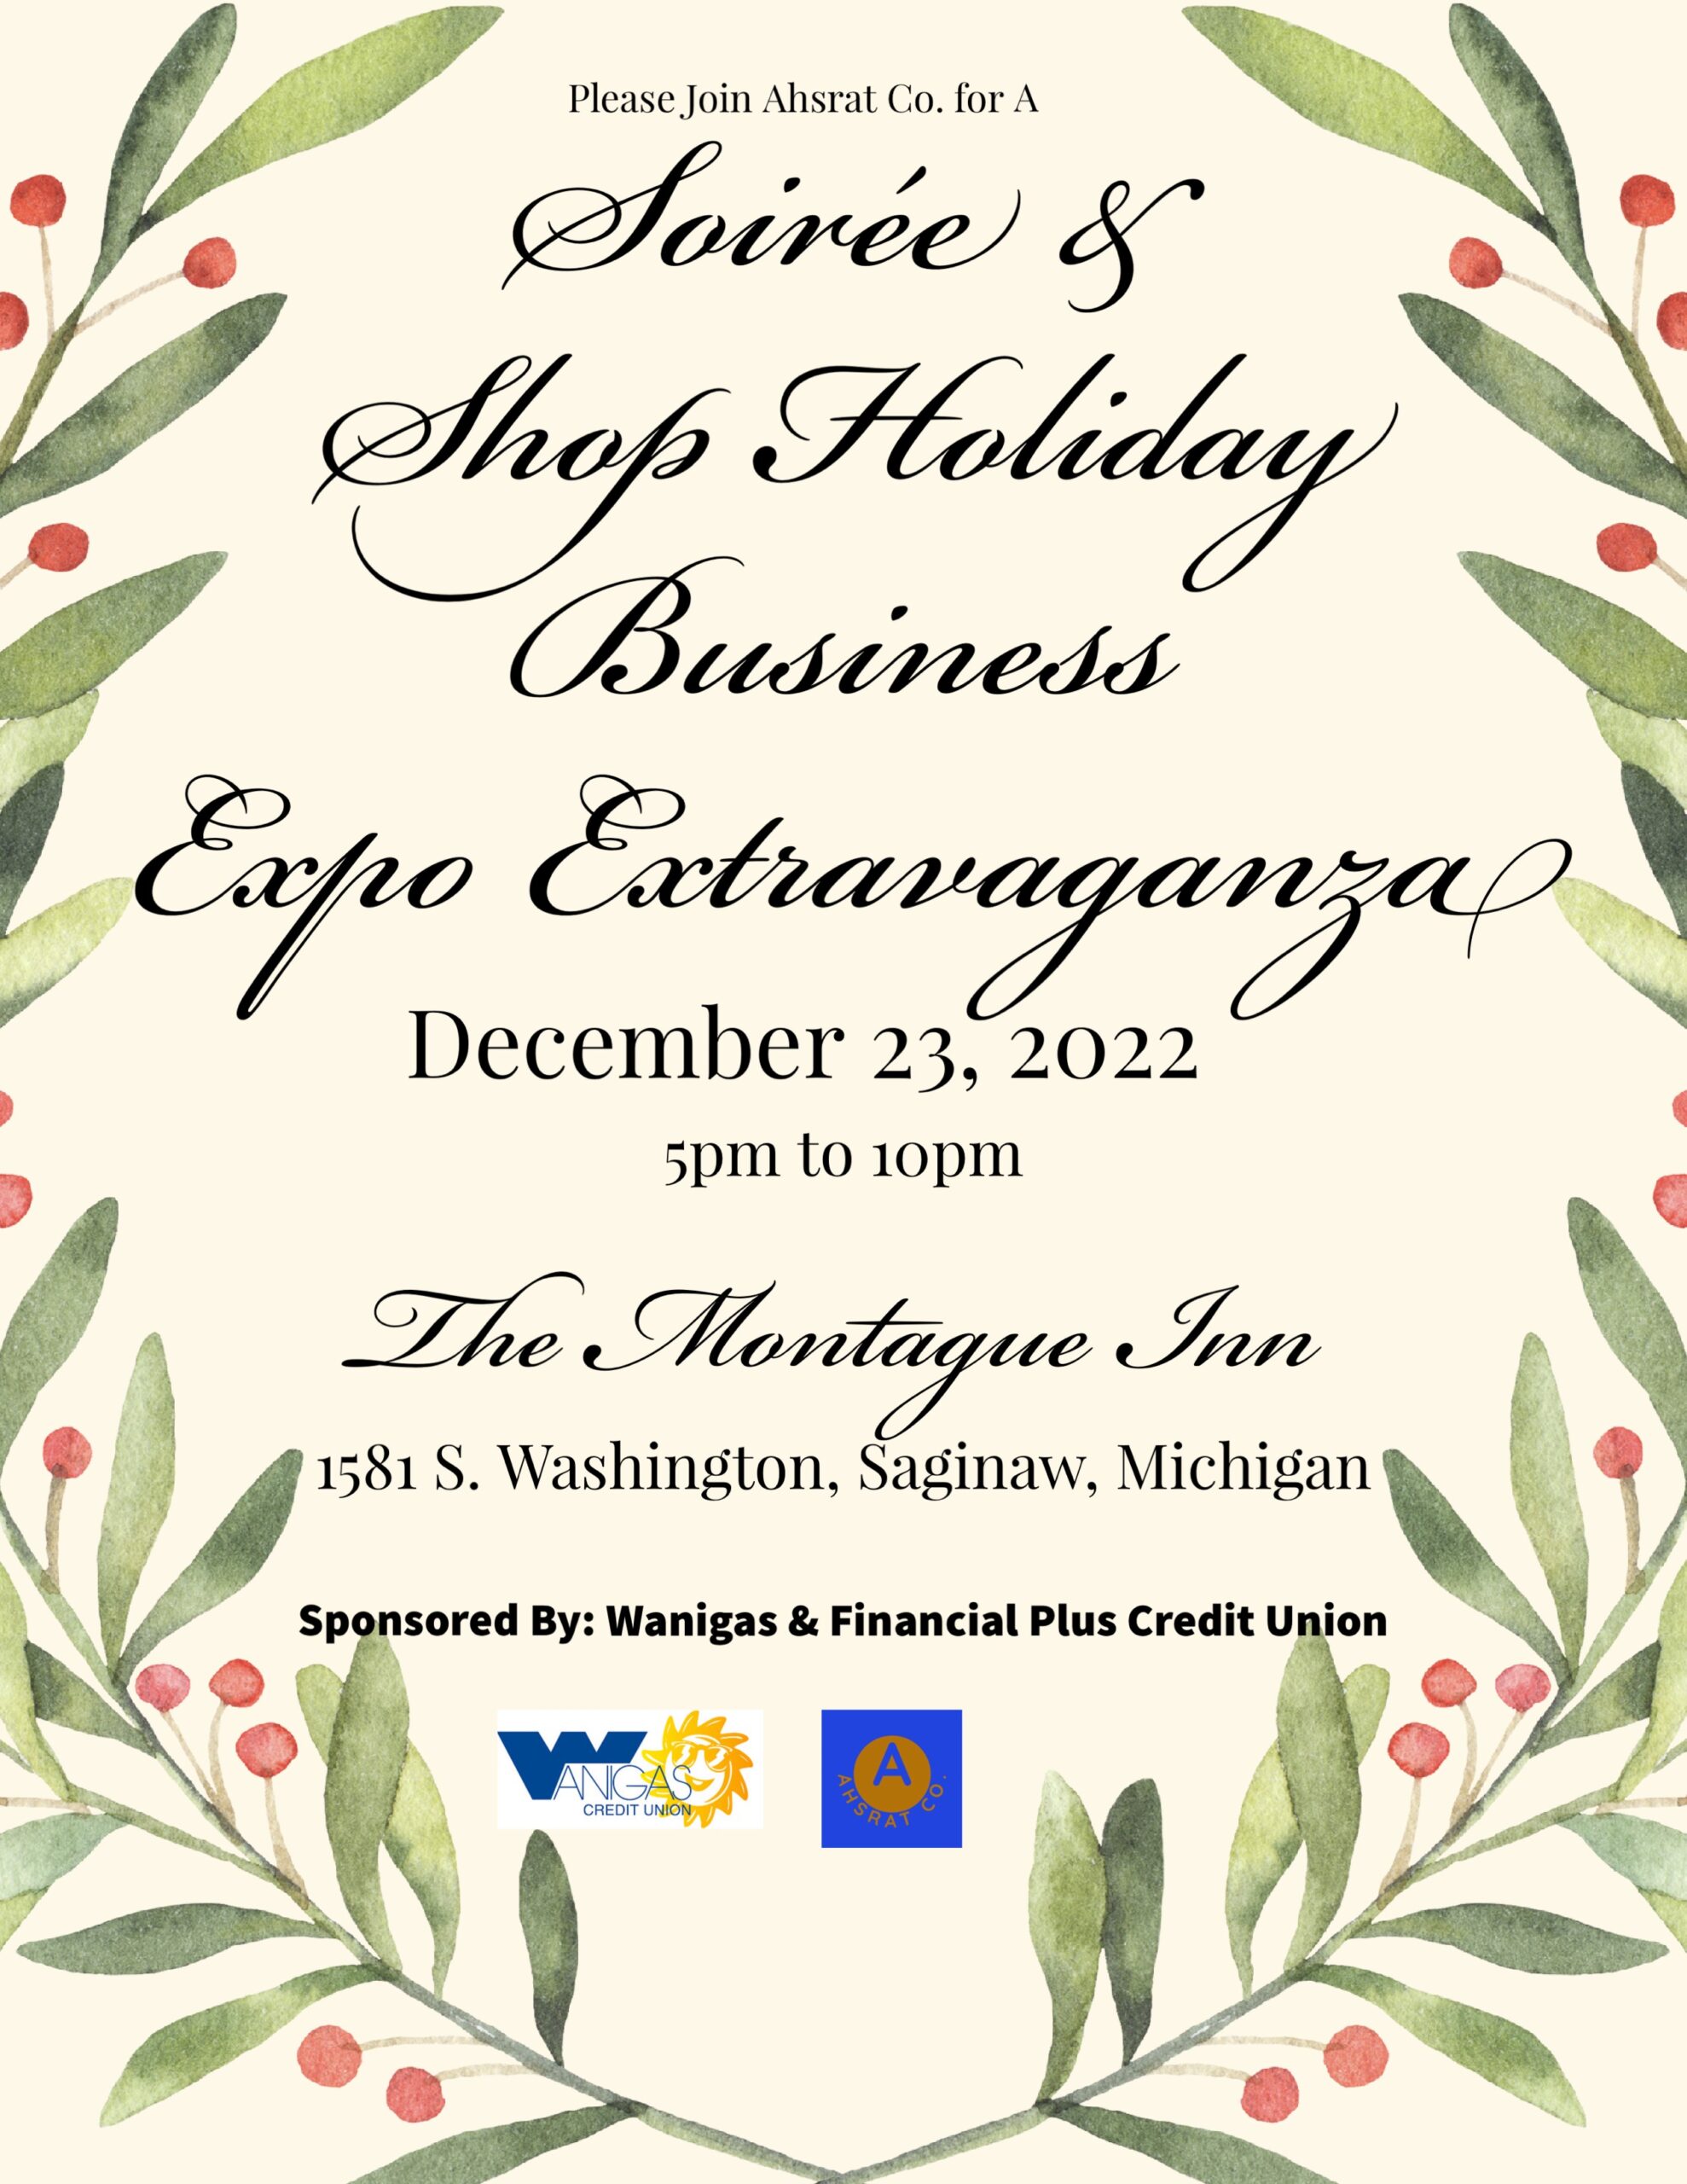 <h1 class="tribe-events-single-event-title">Soirée and Shop Holiday Business Expo Extravaganza</h1>